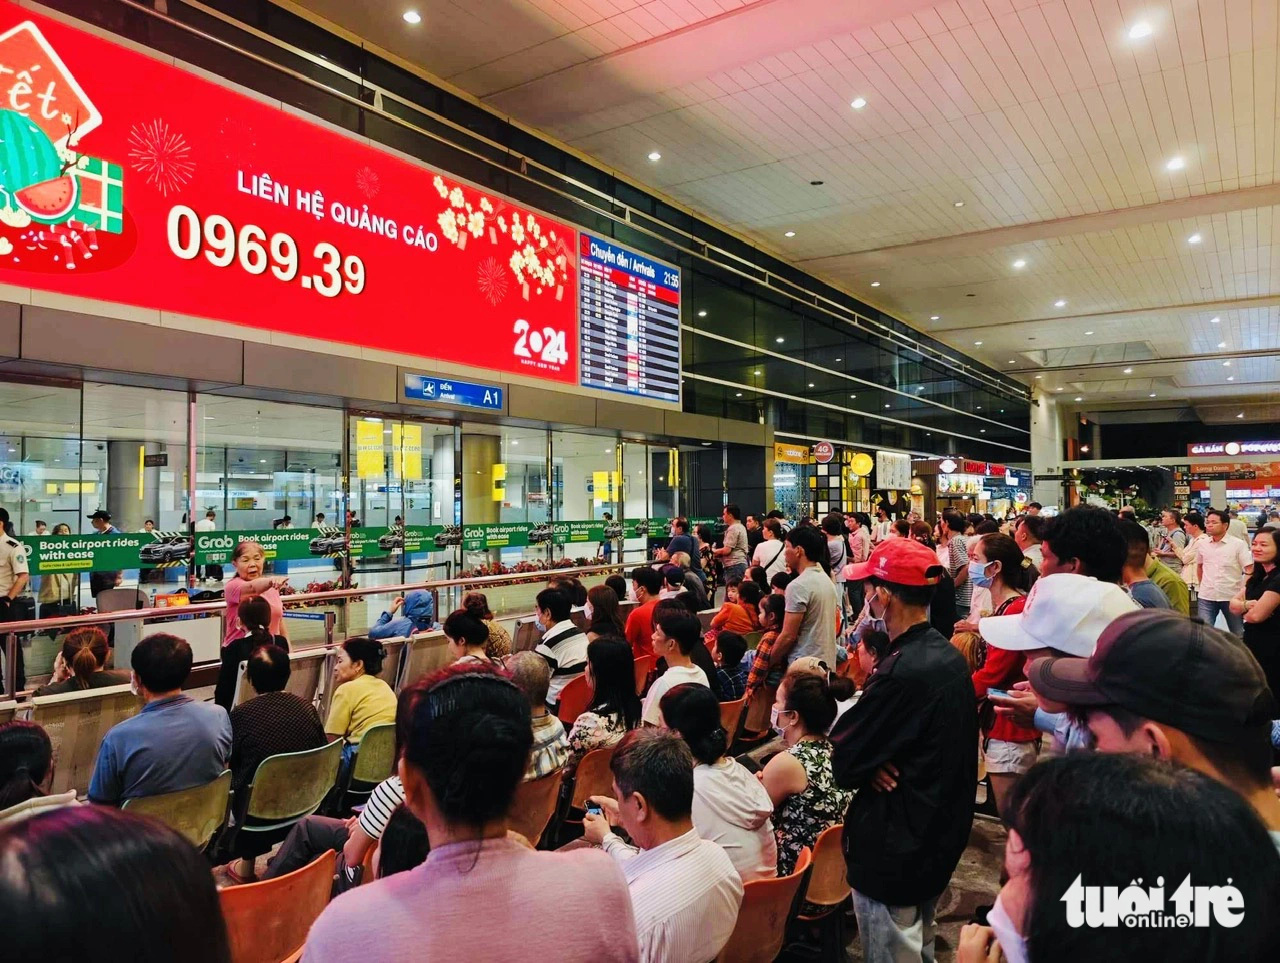 A crowd of people wait for their overseas Vietnamese relatives at the arrival hall of the international terminal at Tan Son Nhat International Airport in Ho Chi Minh City, January 24, 2024. Photo: Cong Trung / Tuoi Tre